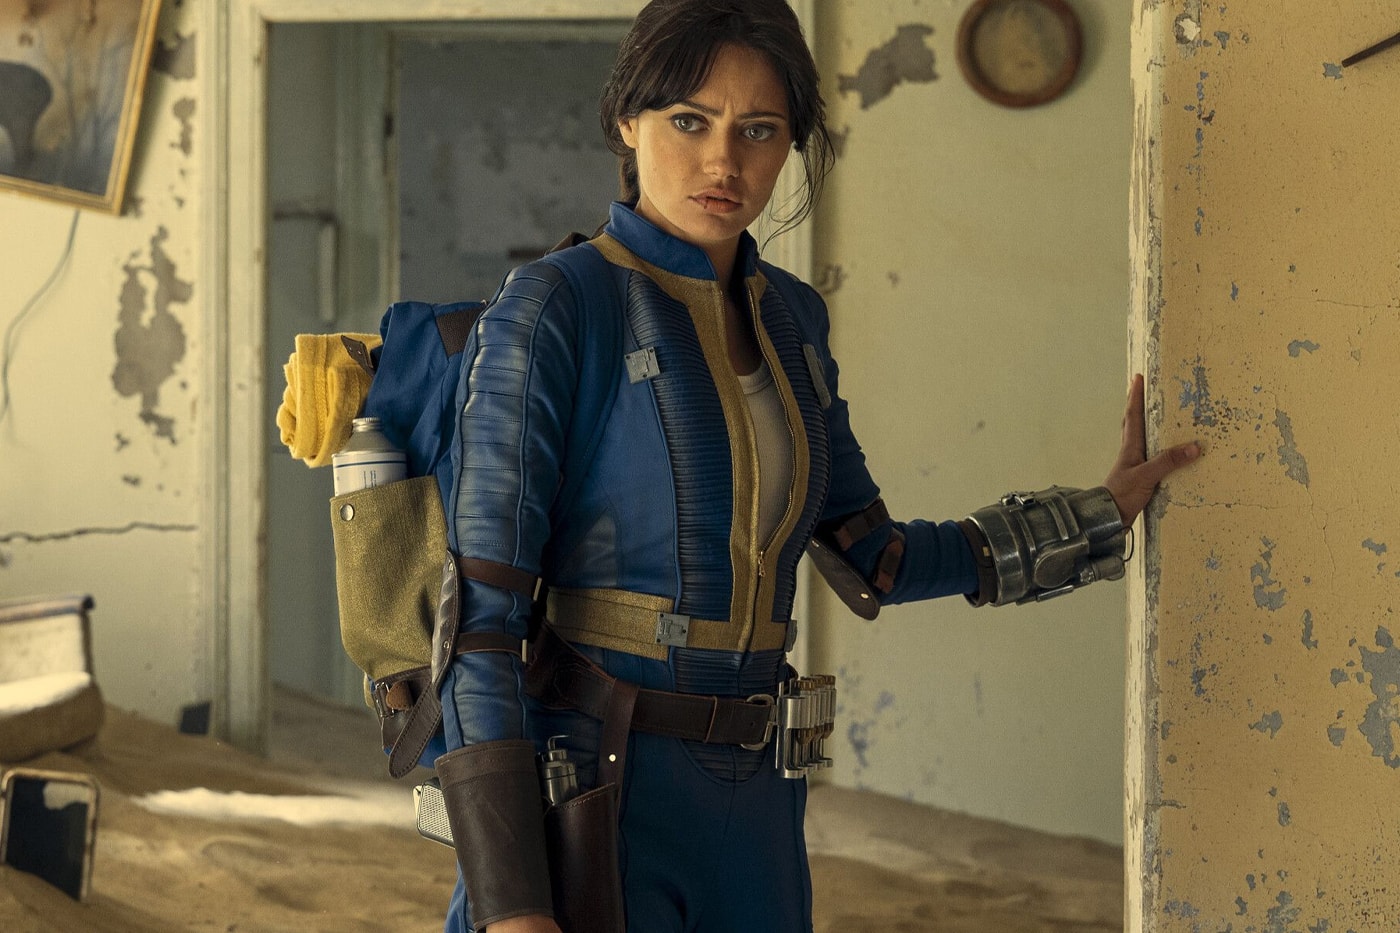 ‘Fallout’ Is Now Prime Video’s Second Most-Watched Title